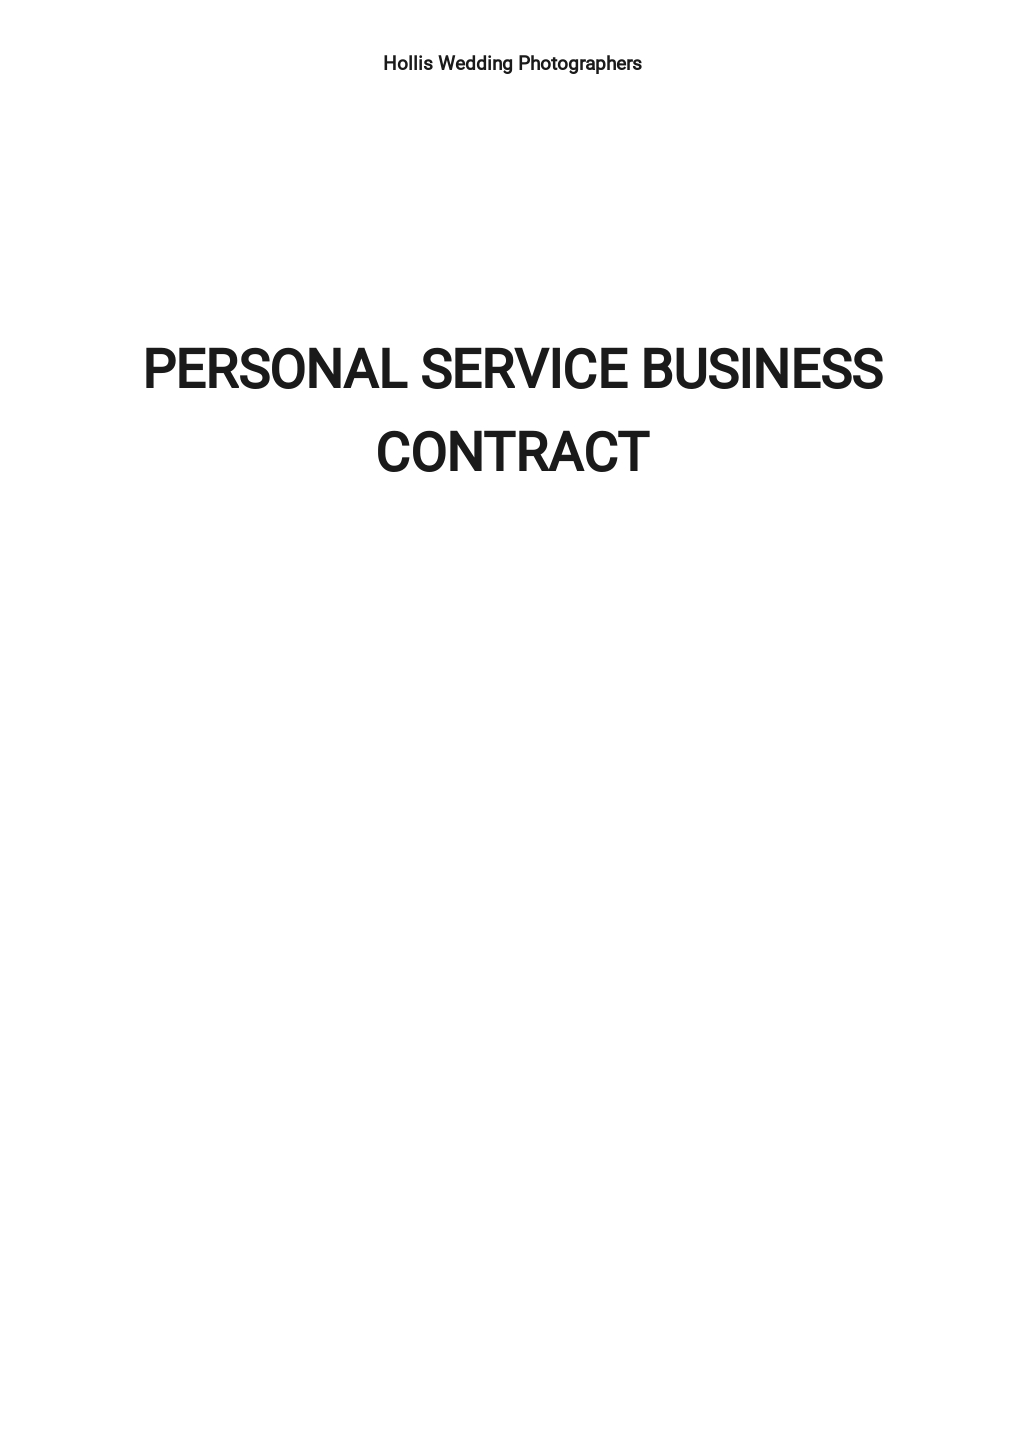 Personal Business Contract Template.jpe